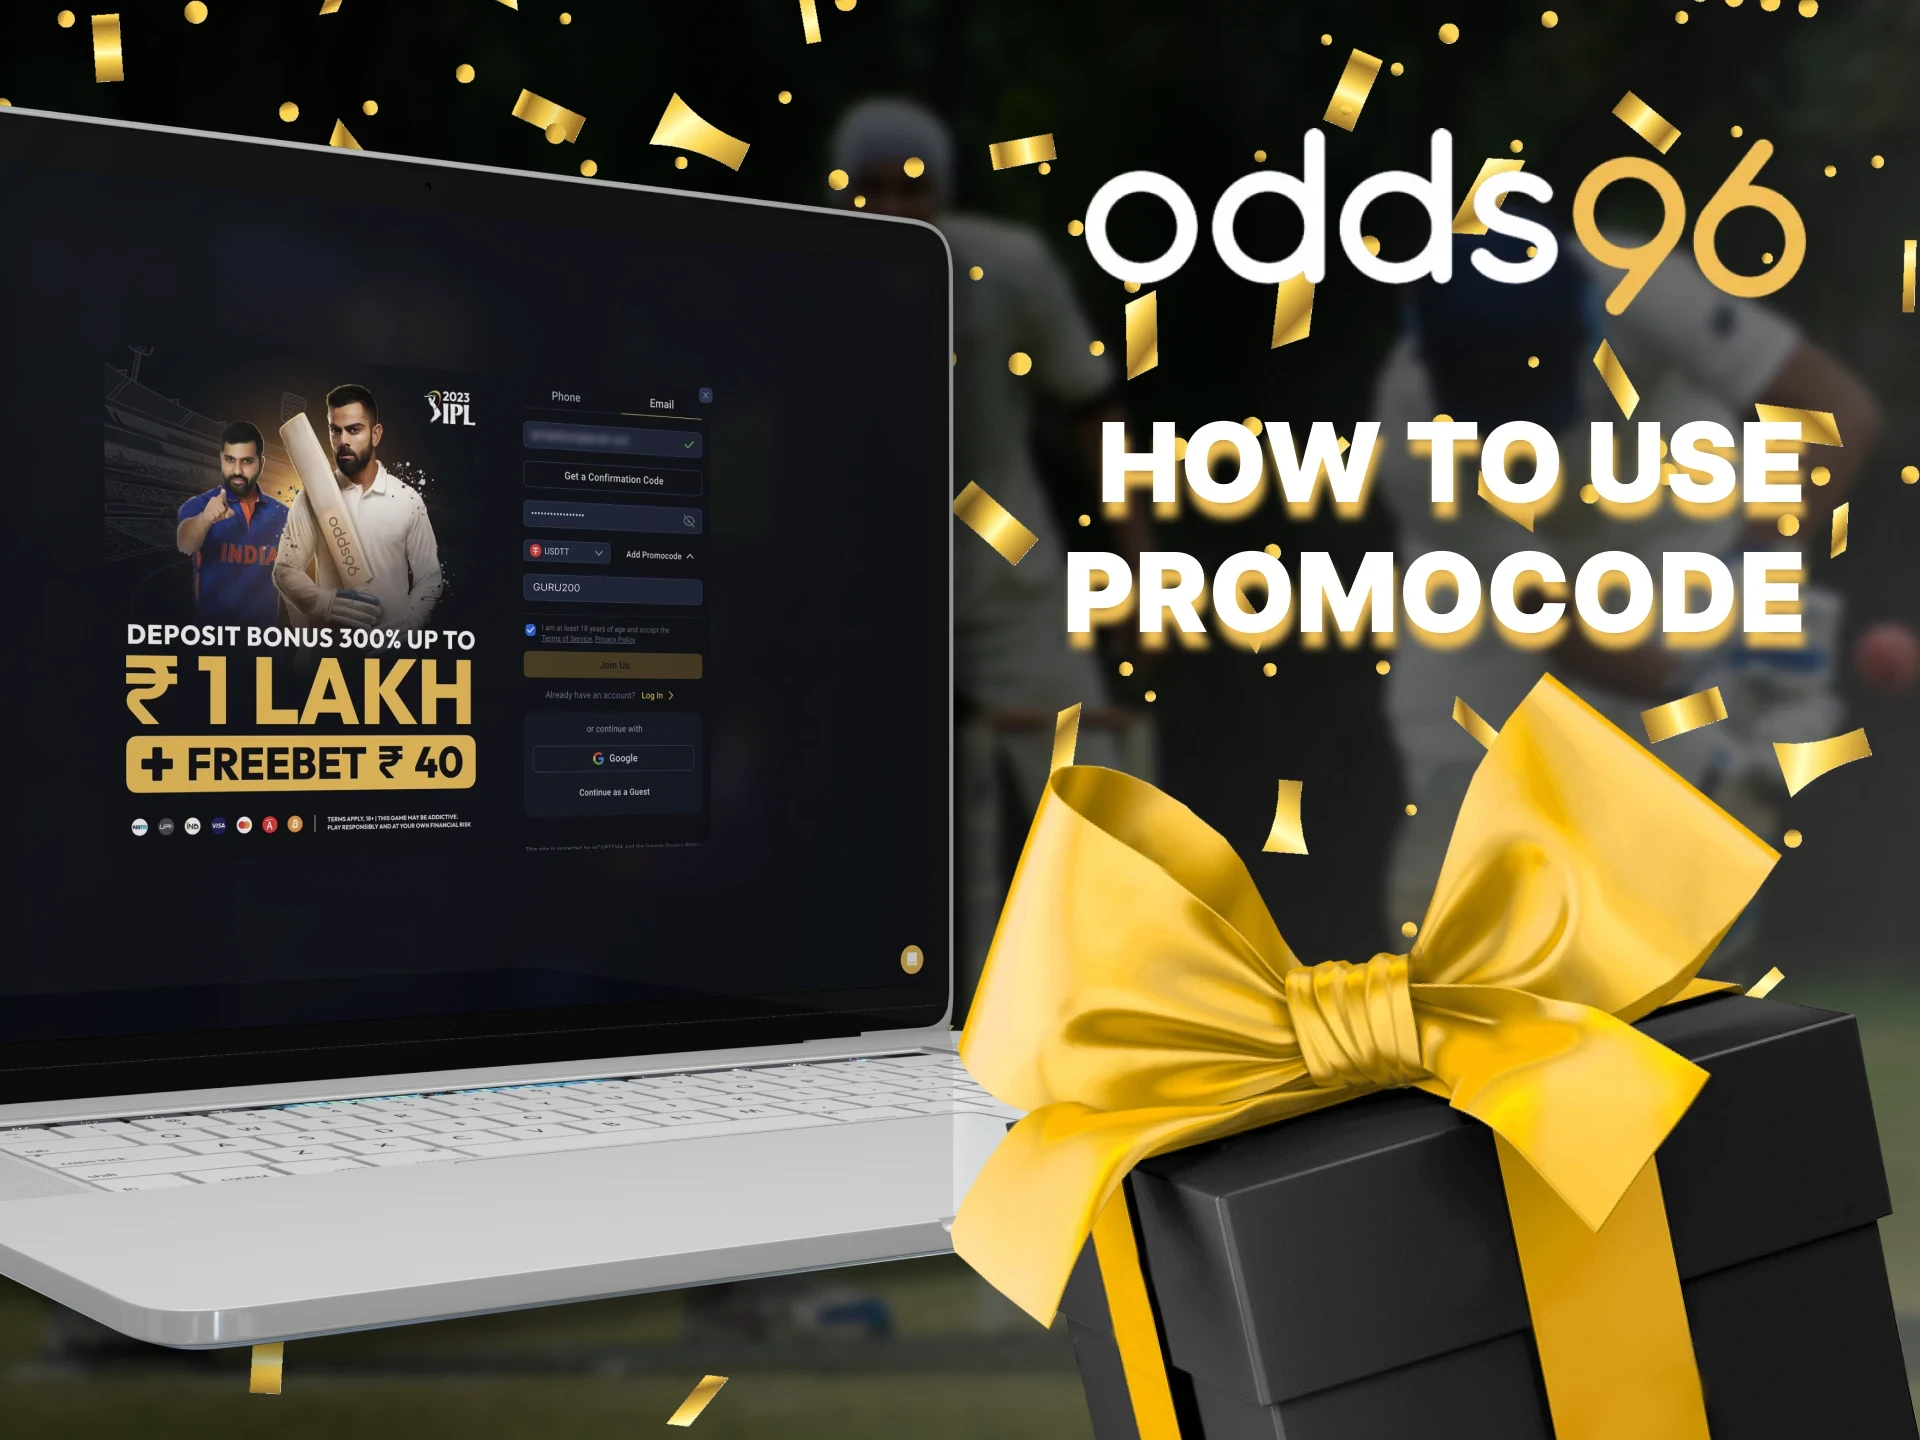 Use these instructions to get the benefits of Odds96 promo code.